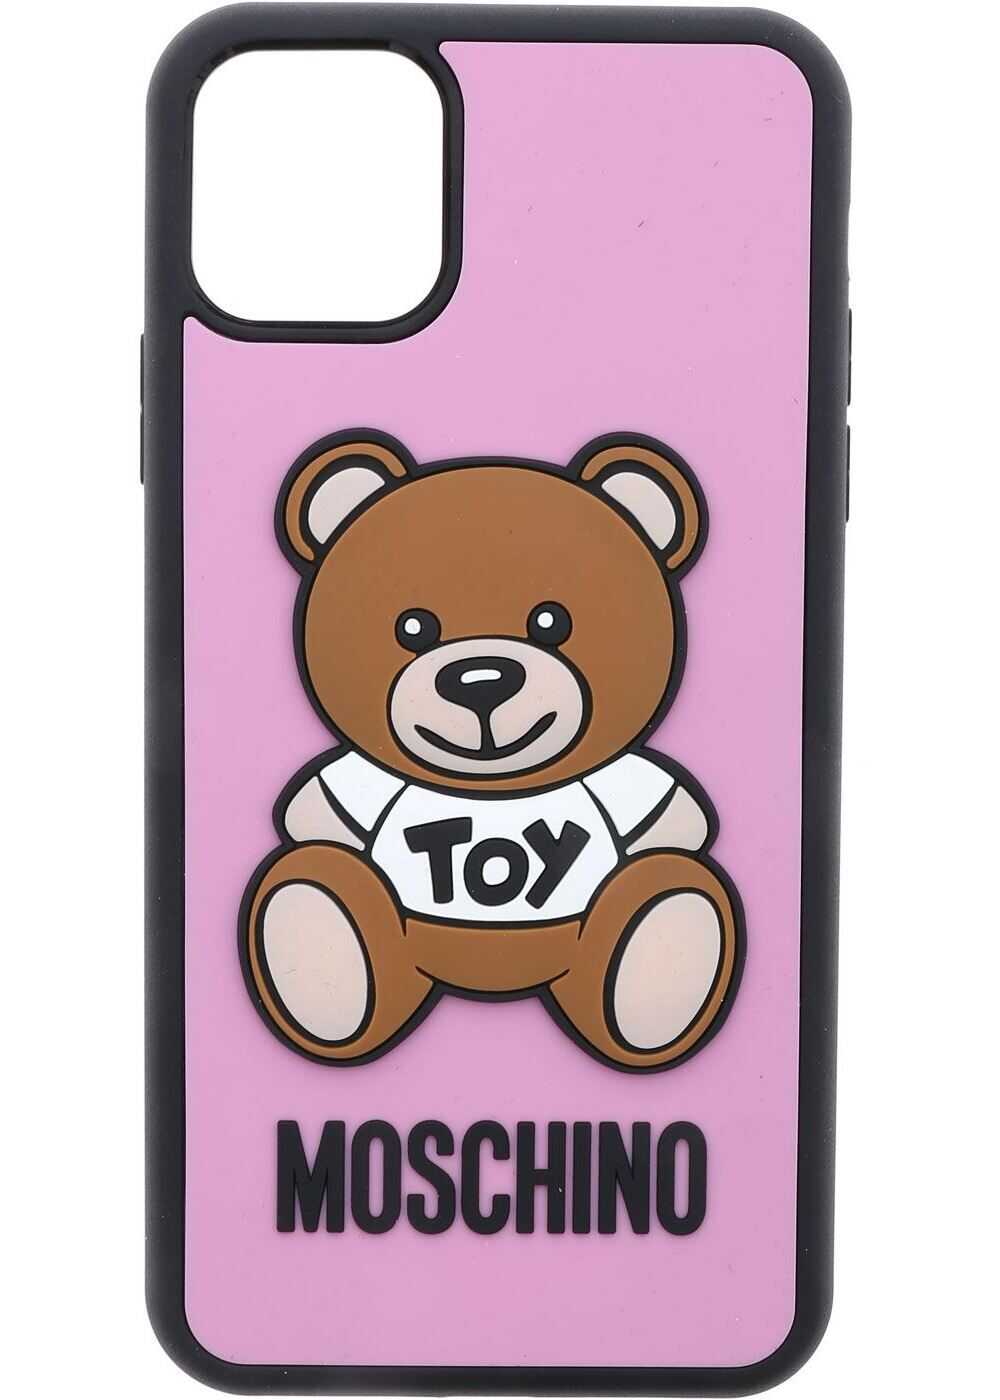 Moschino Teddy Bear Iphone 11 Pro Max Cover In Pink Pink